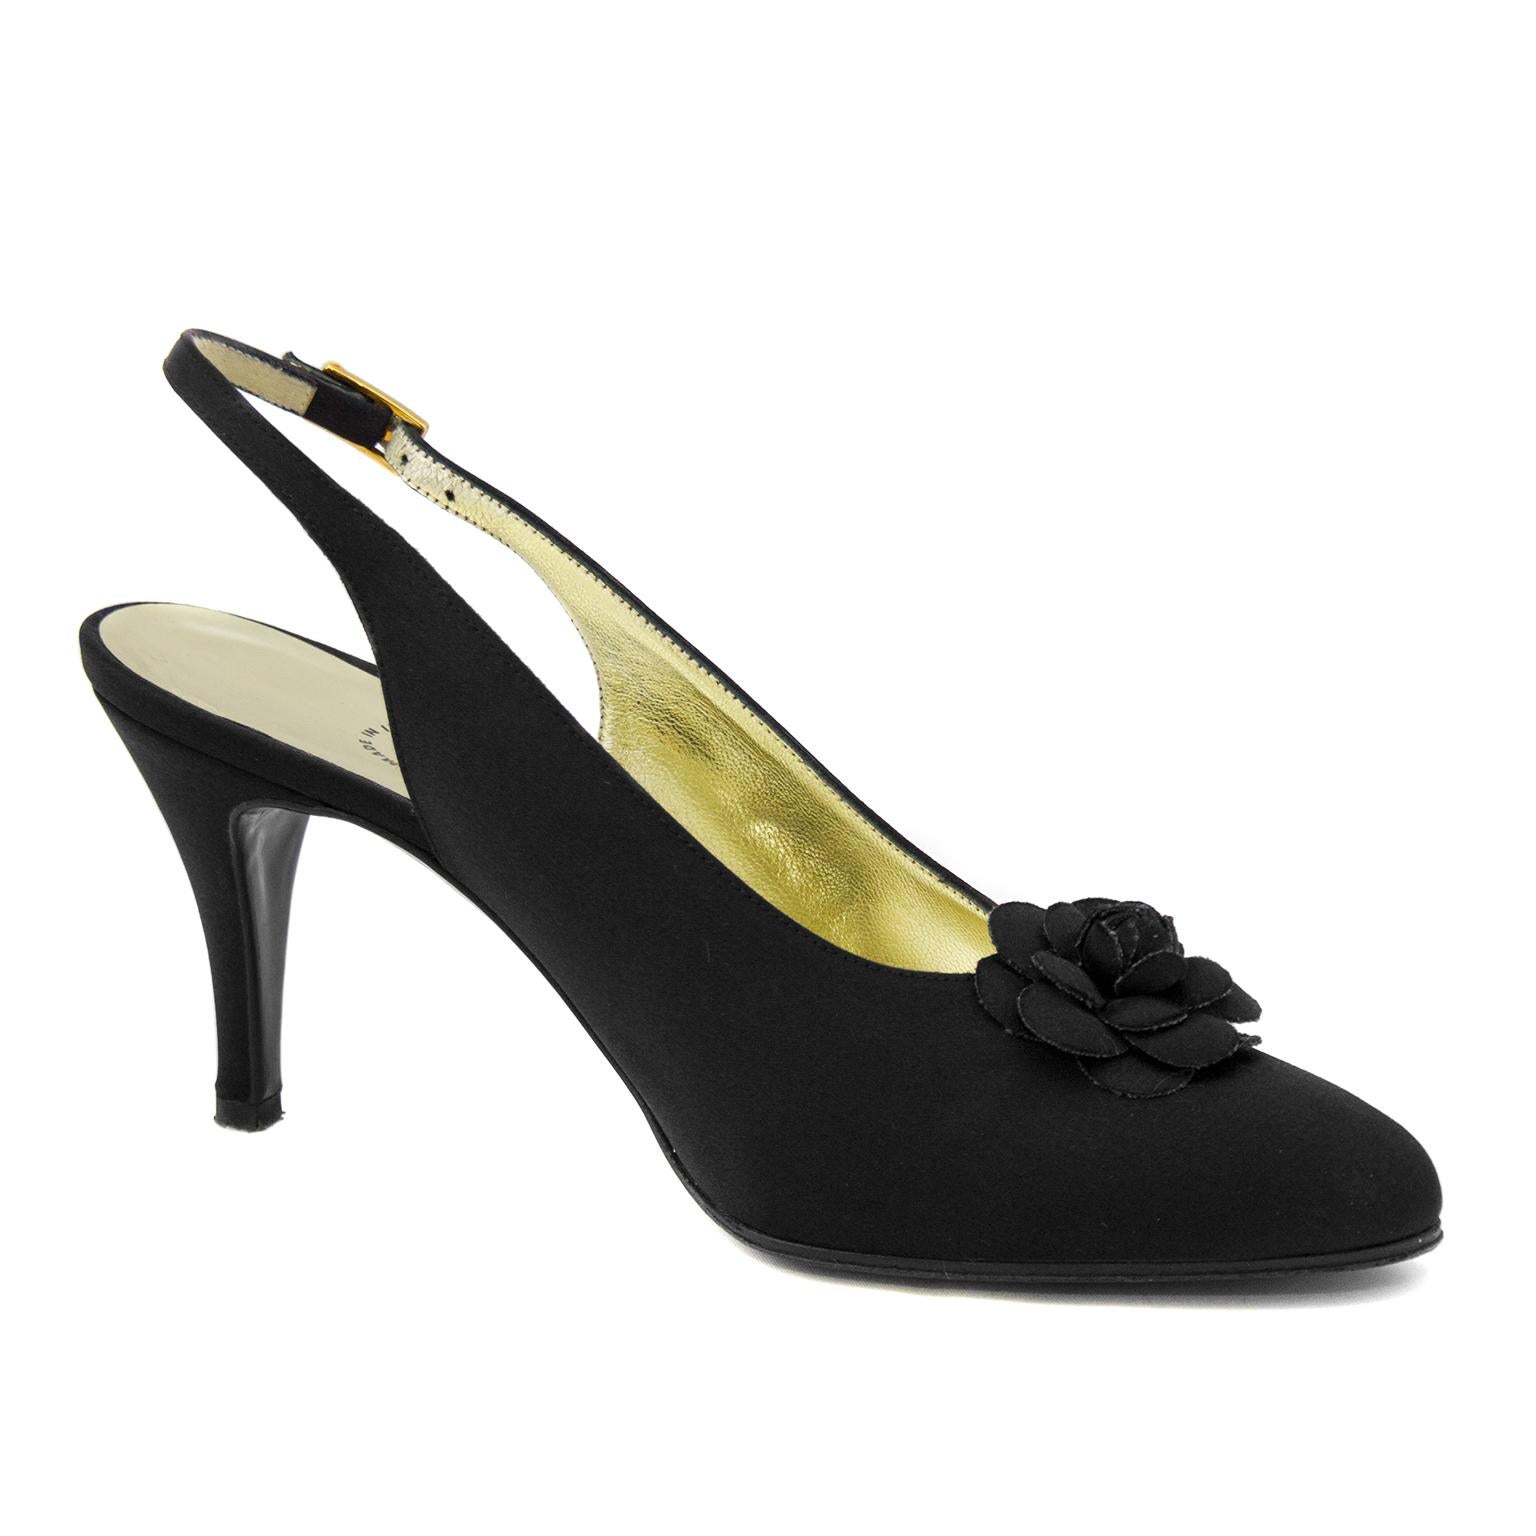 Stunning mid height black satin Chanel evening shoes with adjustable sling backs and gardenia rosette on the toe. A slight point to the to box and gold buckle on the heel strap. In excellent very nearly new condition. Fits a US size 6. Marked 6.5.